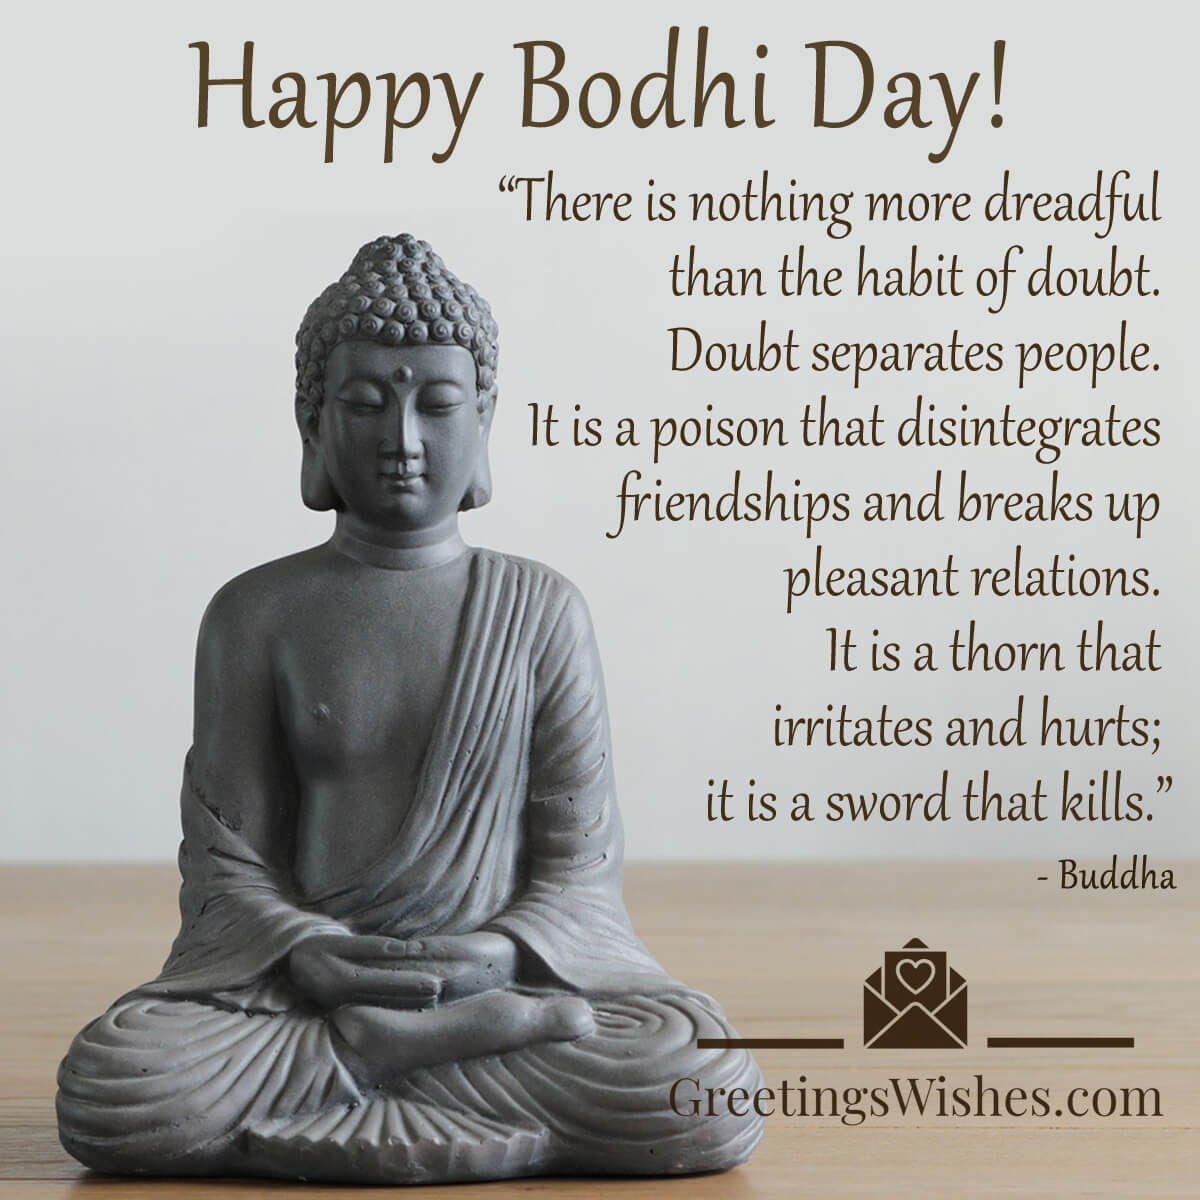 Bodhi Day Quotes